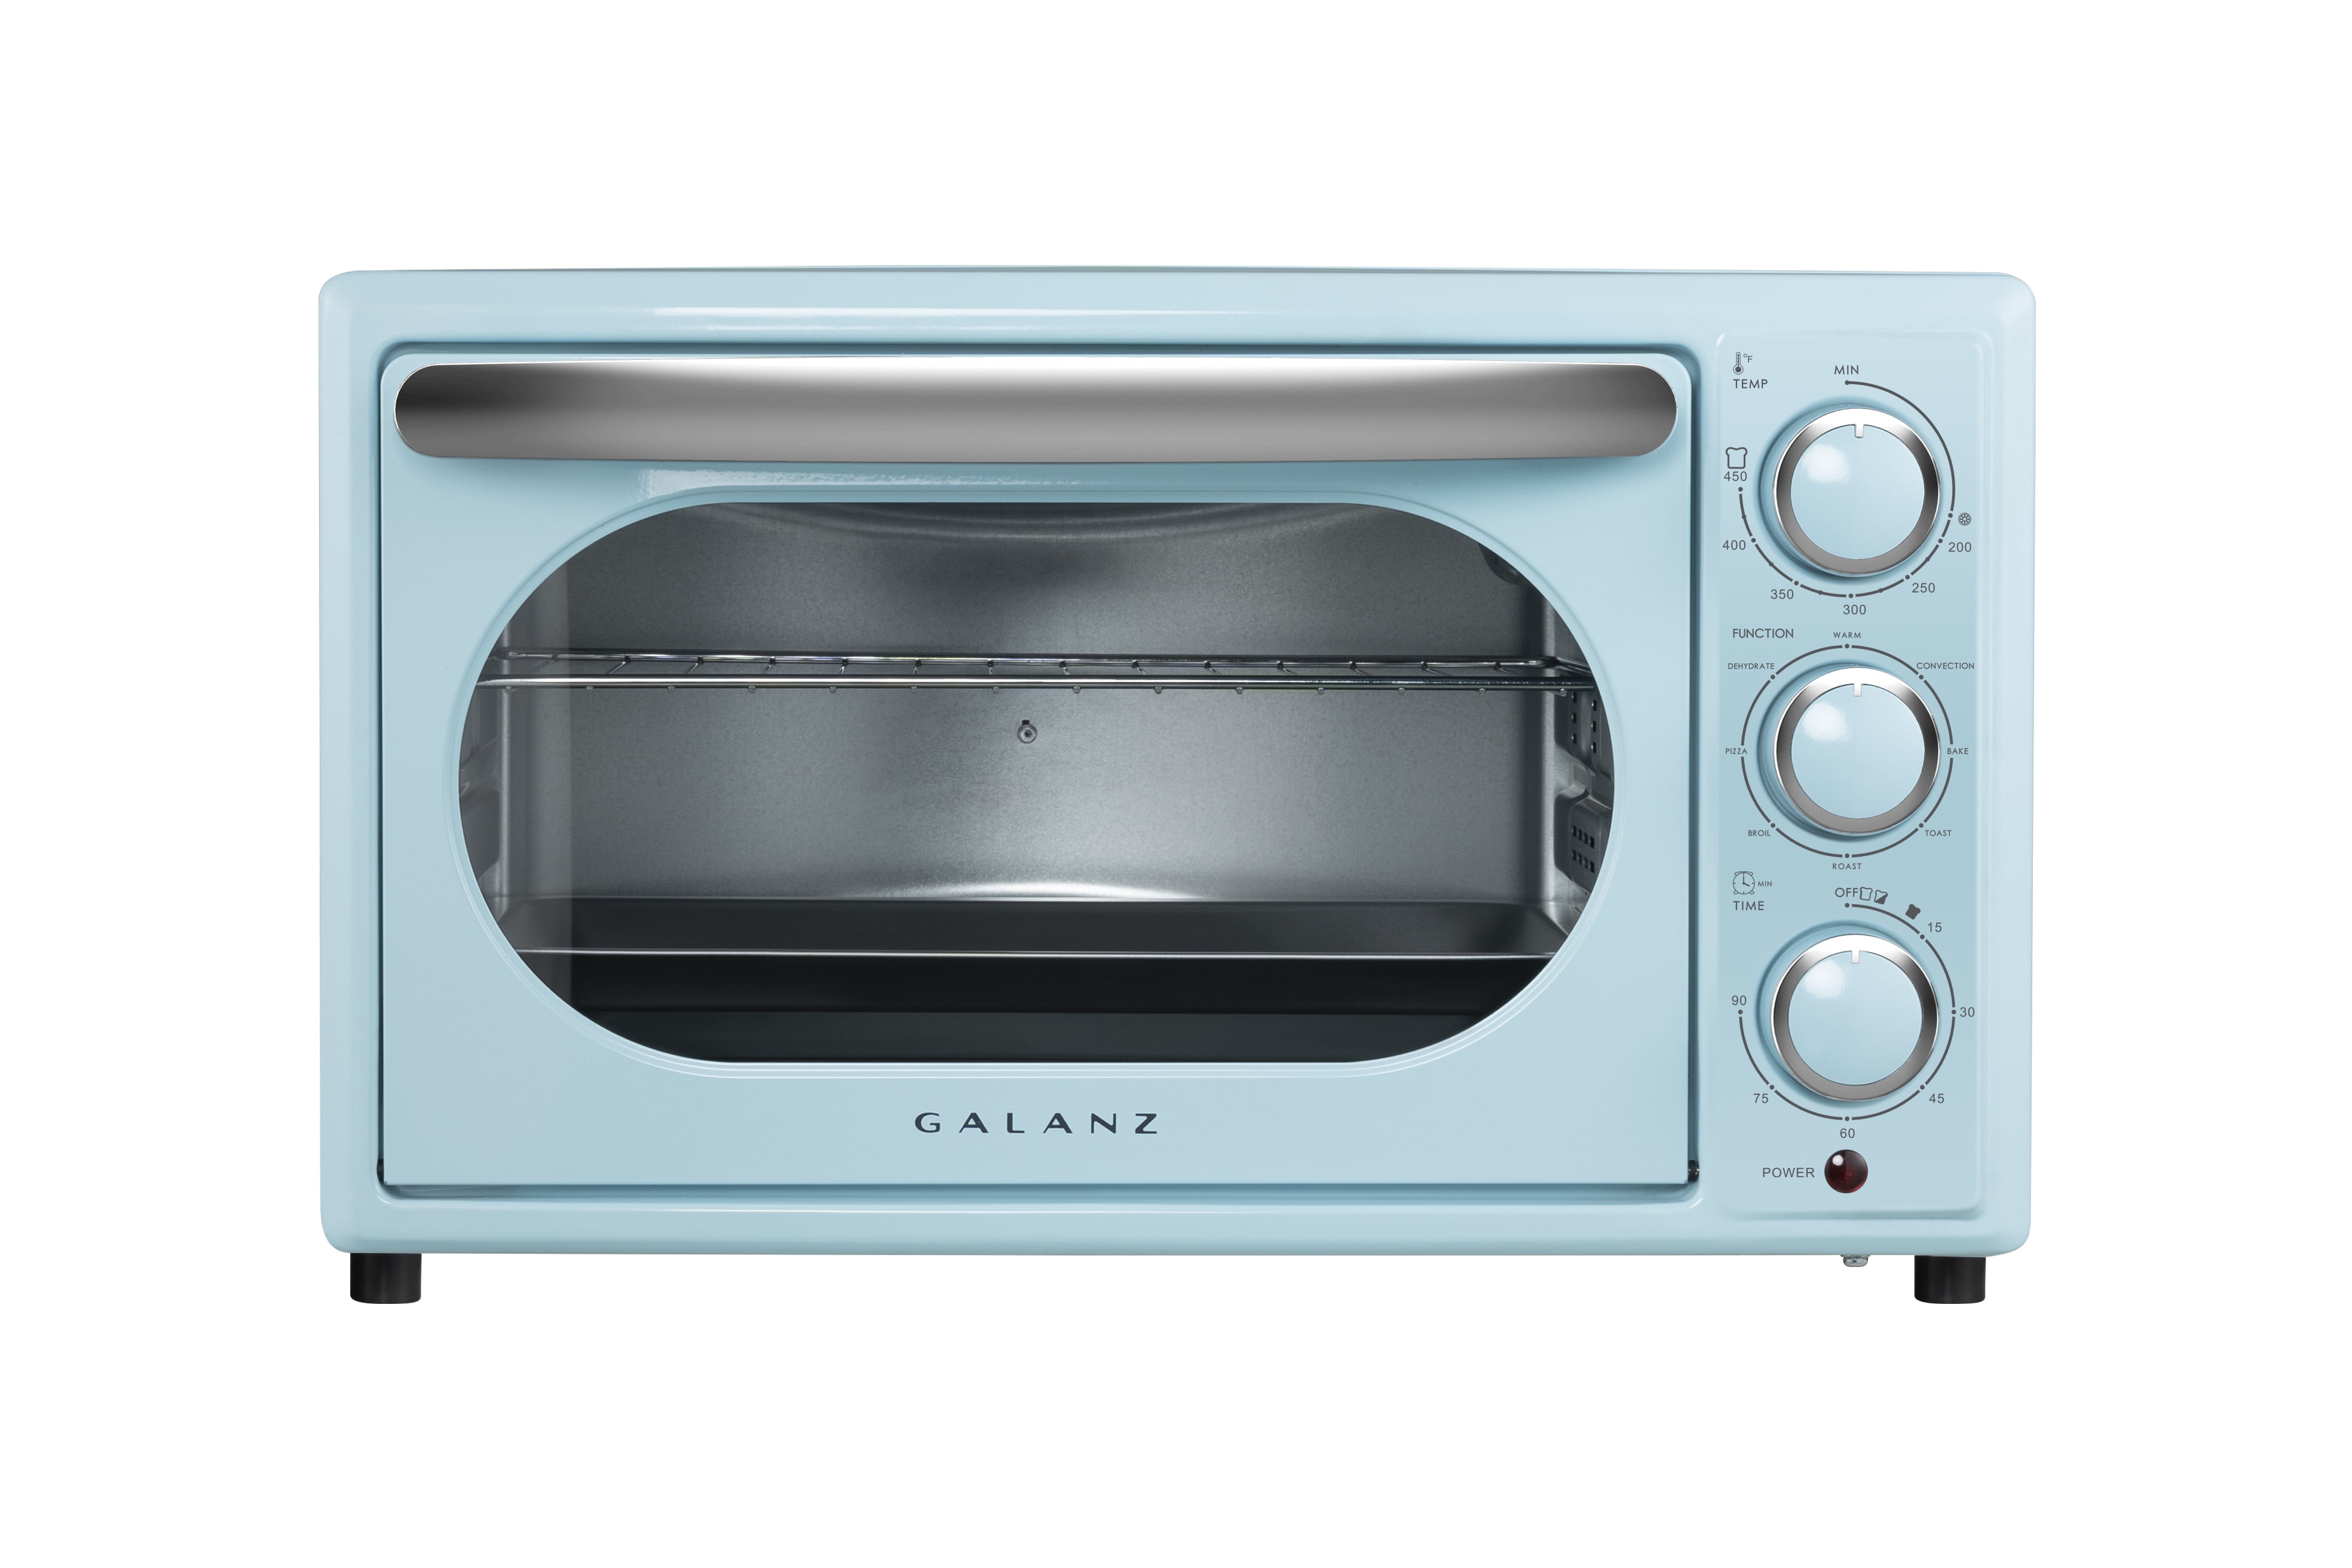 Galanz Retro French door 7-Slice Red Convection Toaster Oven with  Rotisserie (1800-Watt) in the Toaster Ovens department at